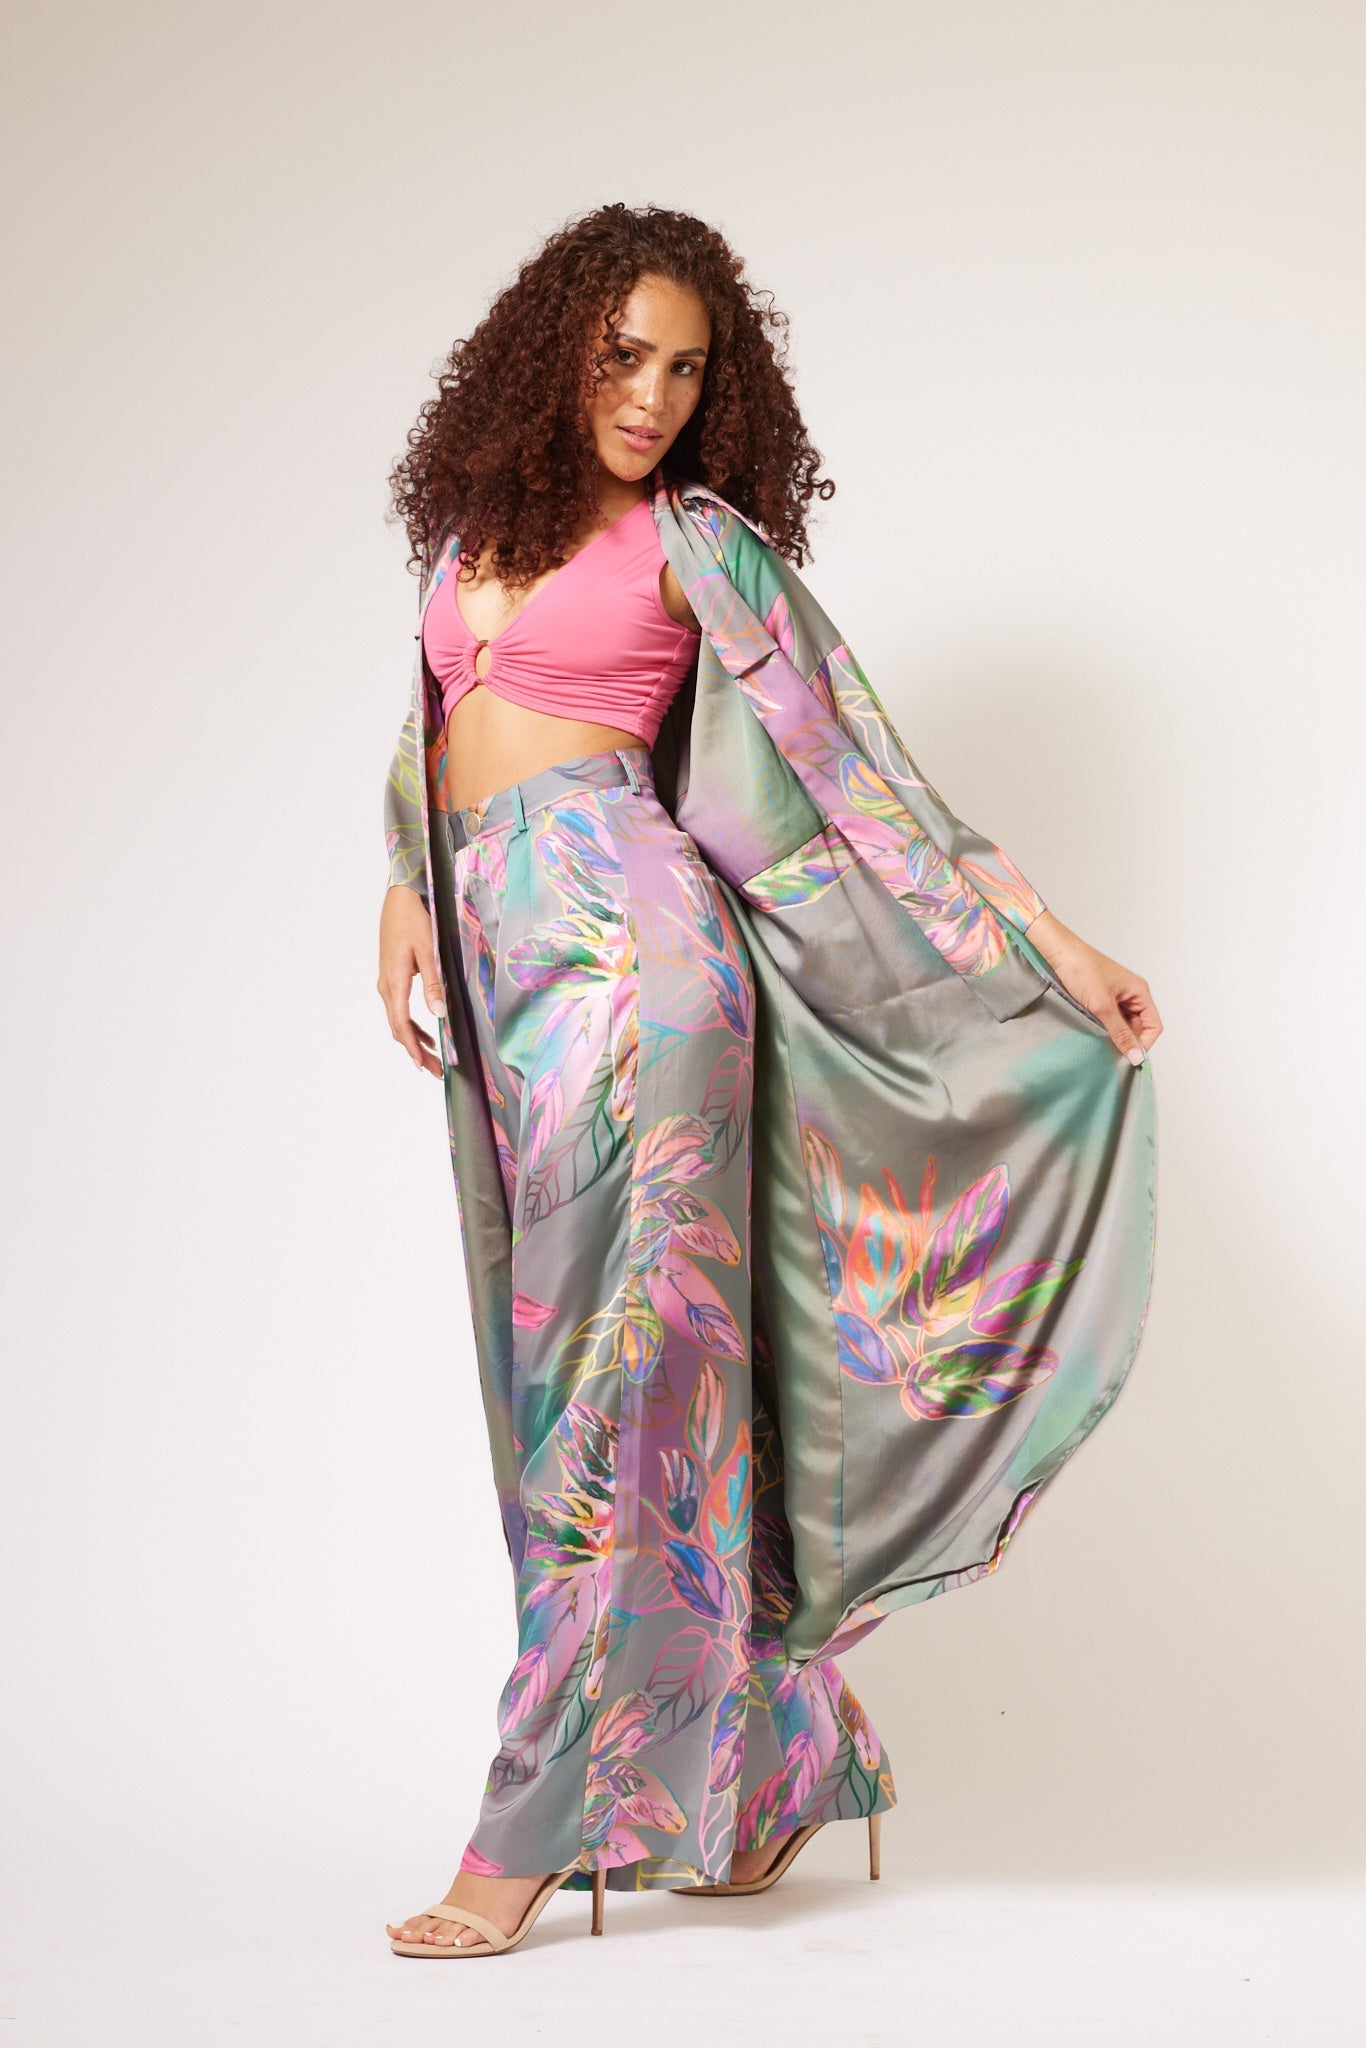 woman modelling all over multicolored tropical print kimono duster and matching yacht slacks made with recycled textiles 4